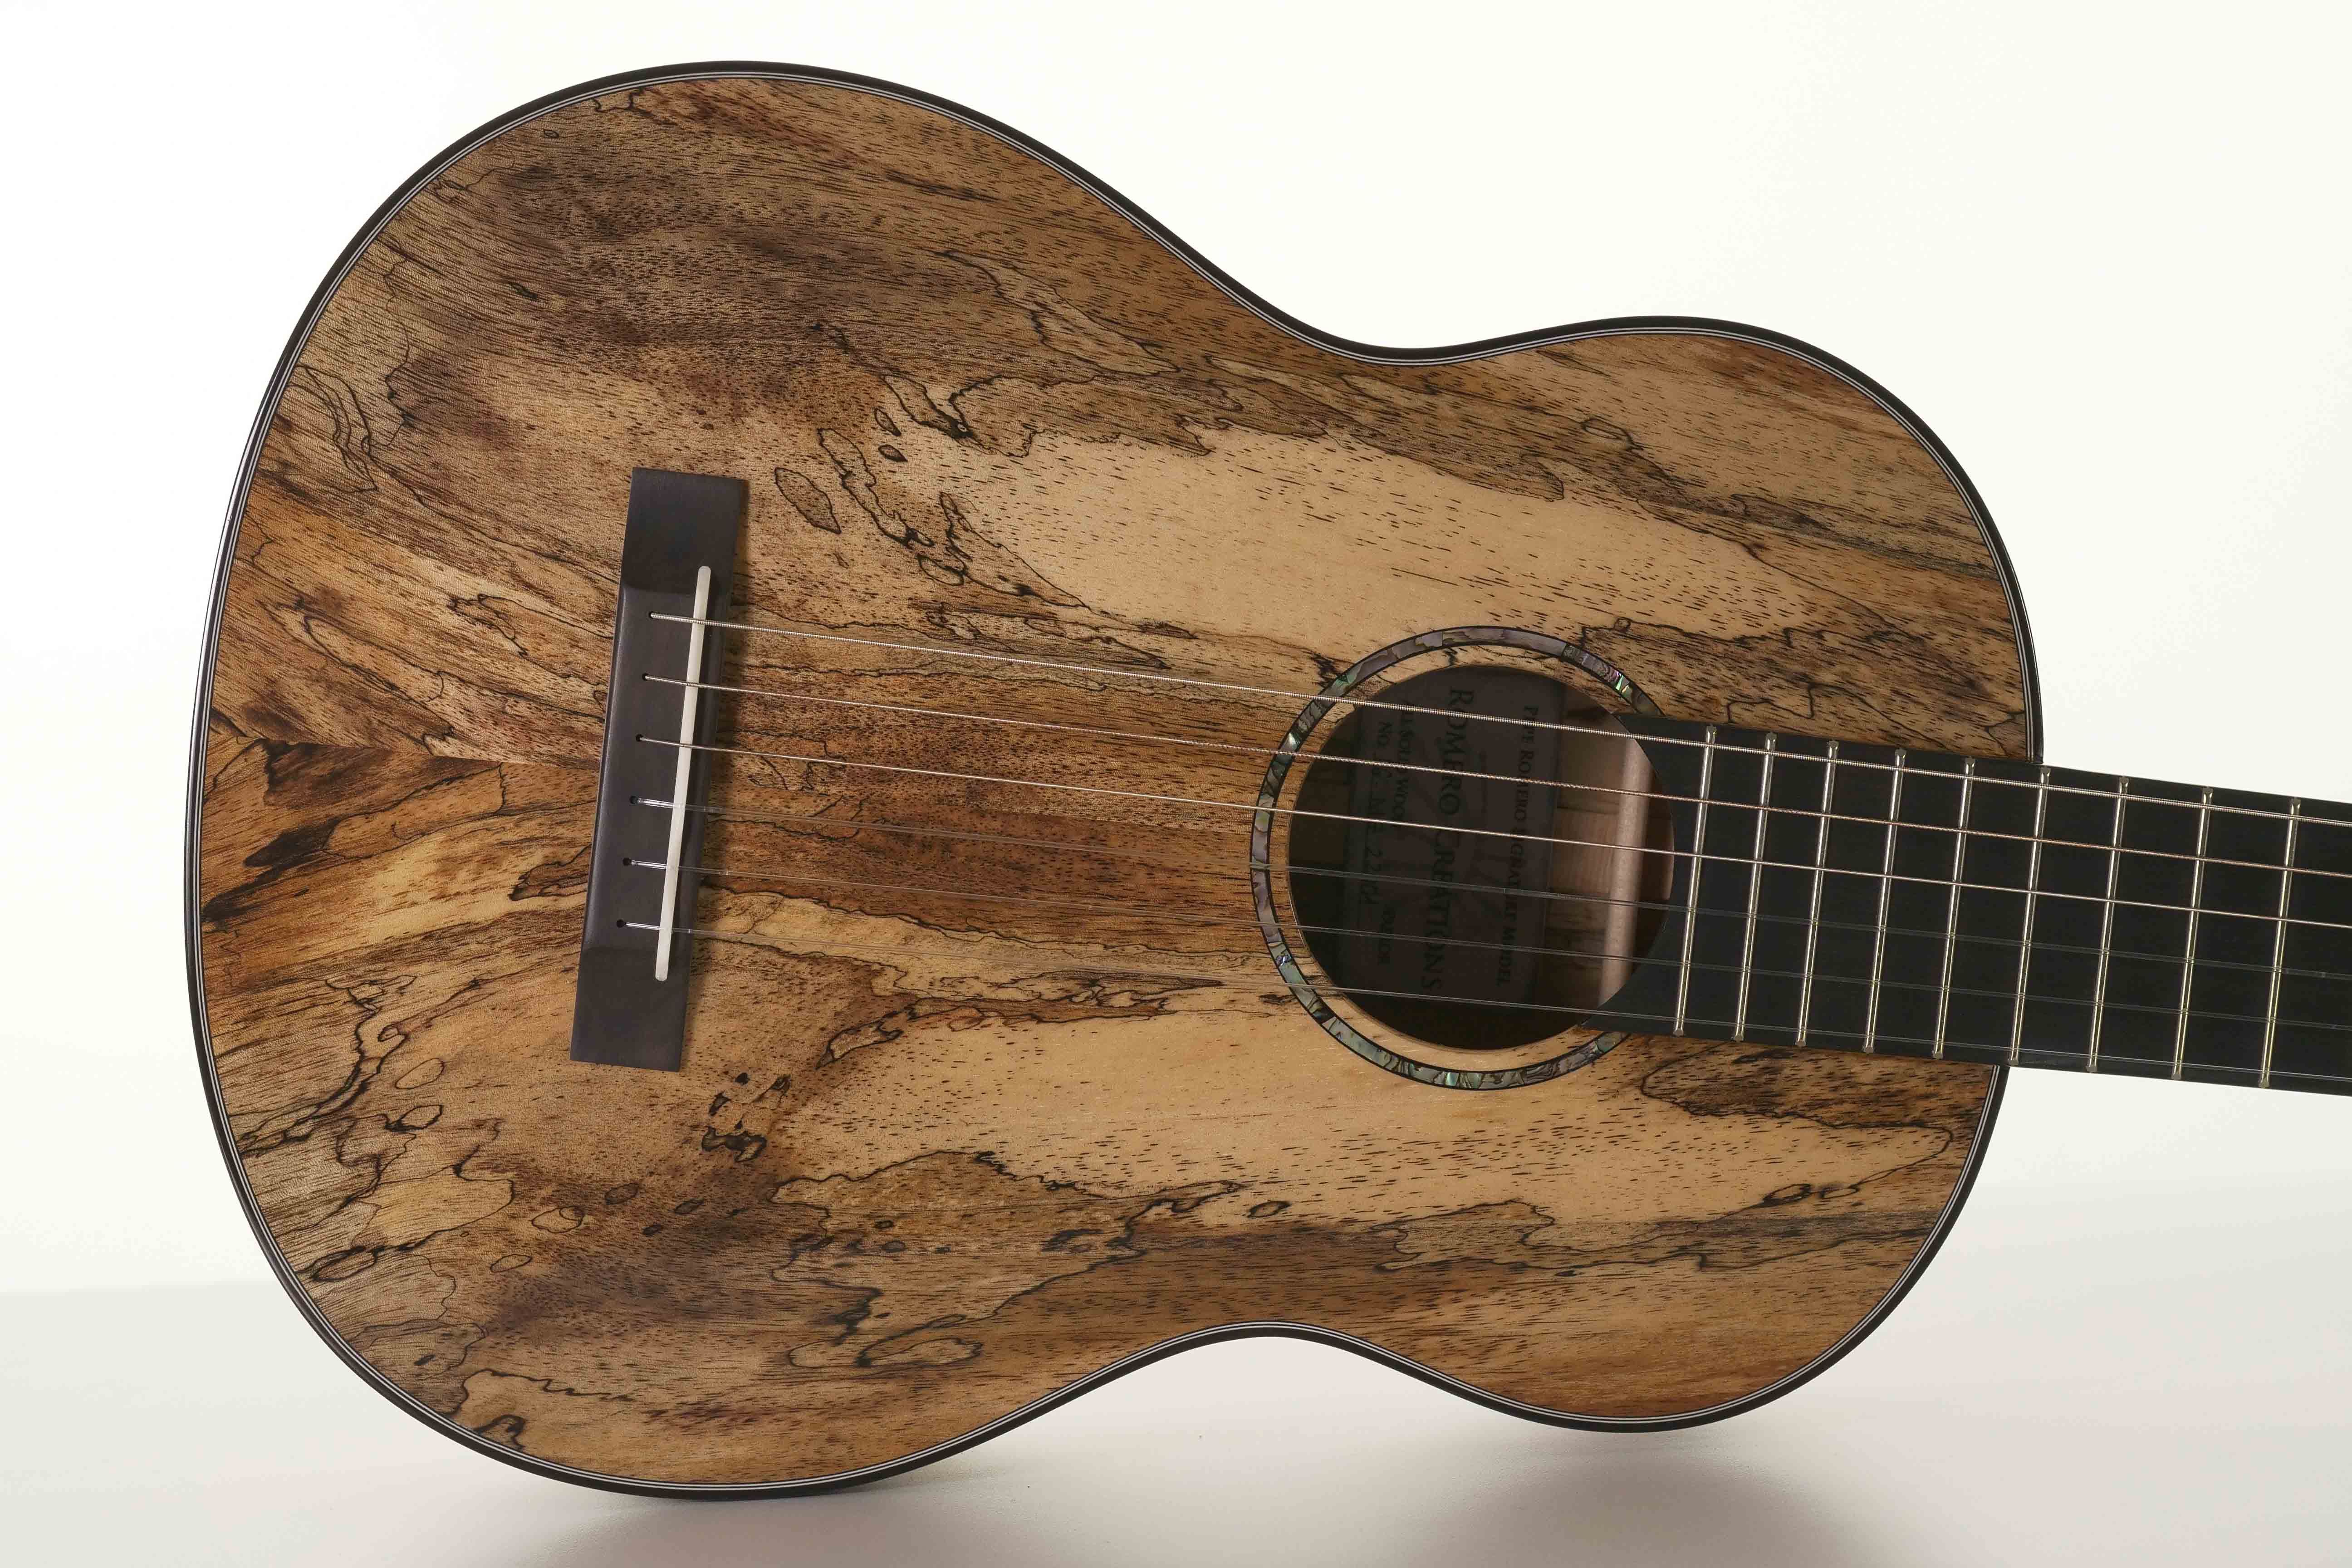 Romero Creations RC-P6-MG Parlor Guitar Spalted Mango "VERO" LIMITED EDITION